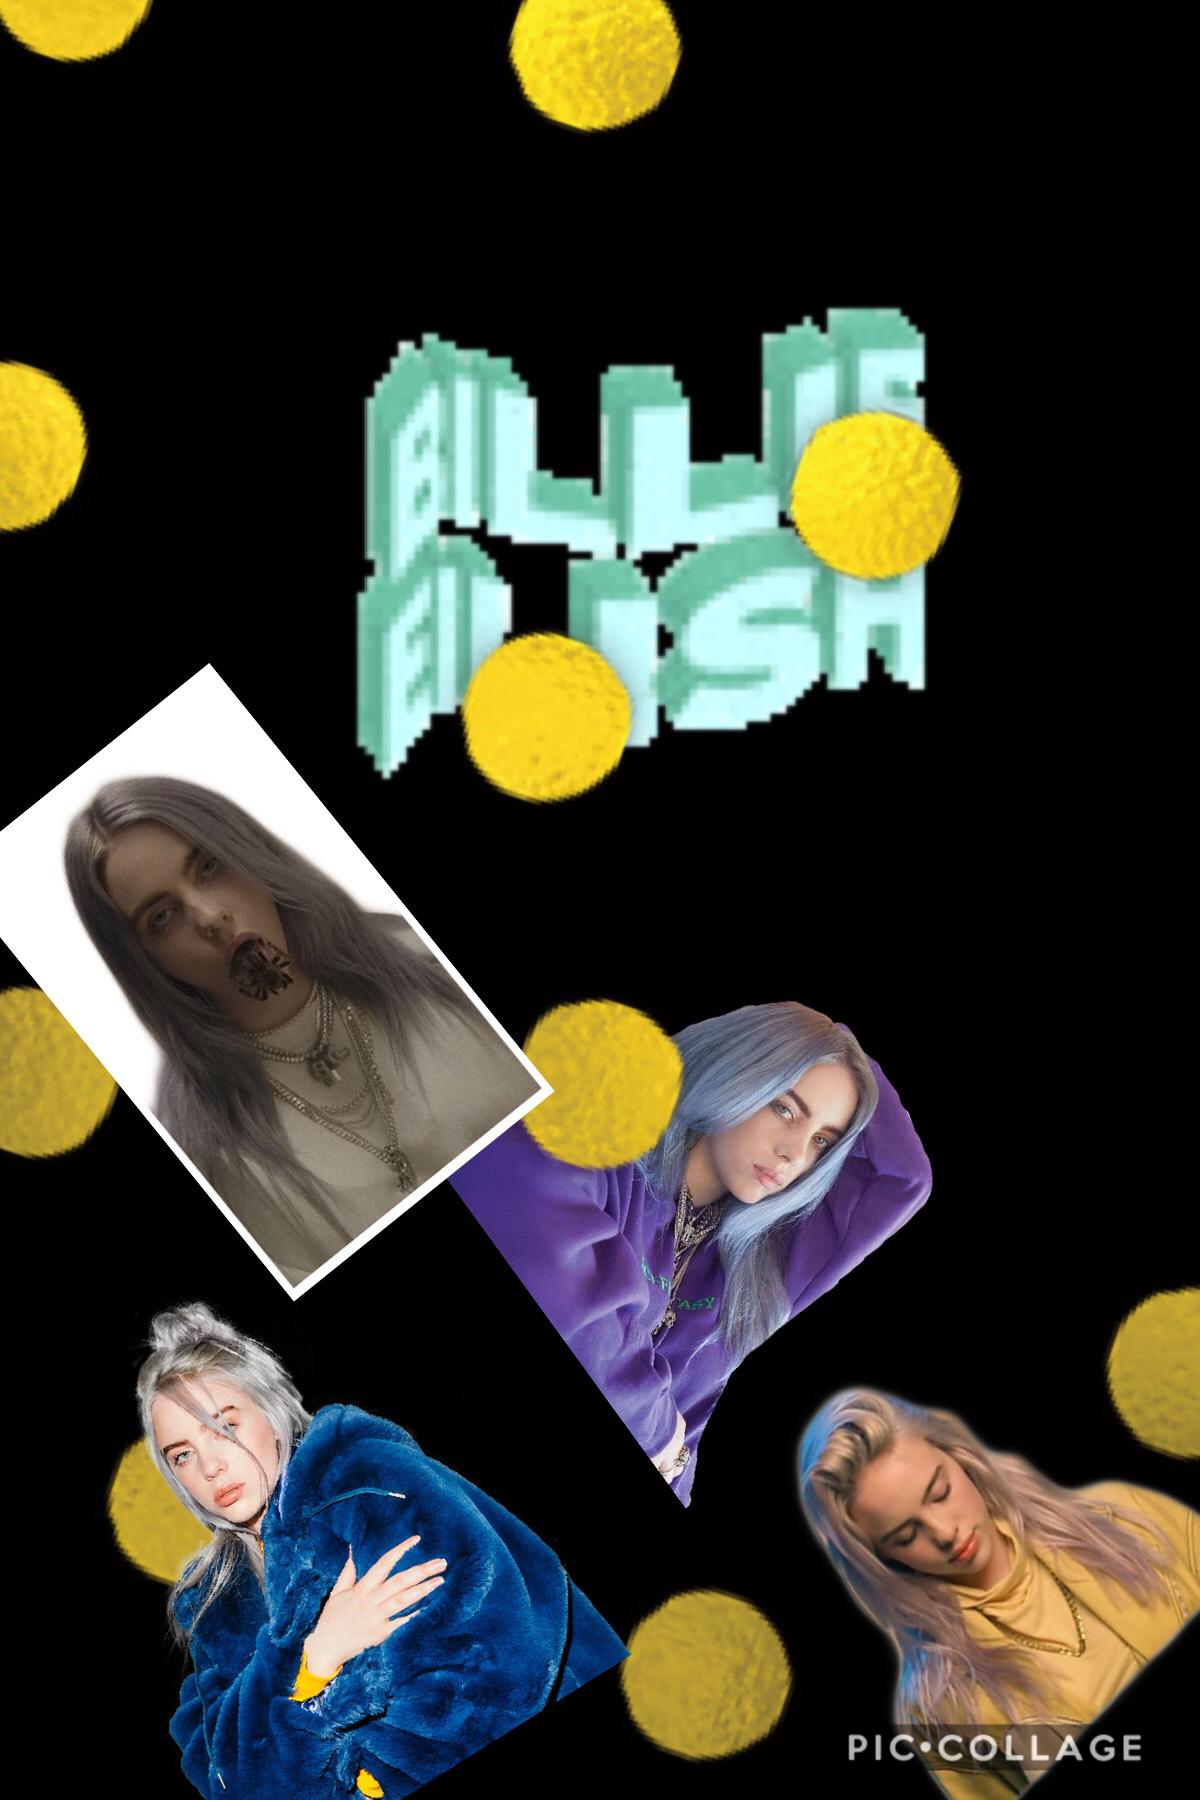    Hey do you guys love billie sukkah well I do if you do tap this yellow flower🌼 and now make the best remix with it and I will shout it out on Pic Collage for everyone to see you’re amazing skills of art it starts the 25/3/2019
